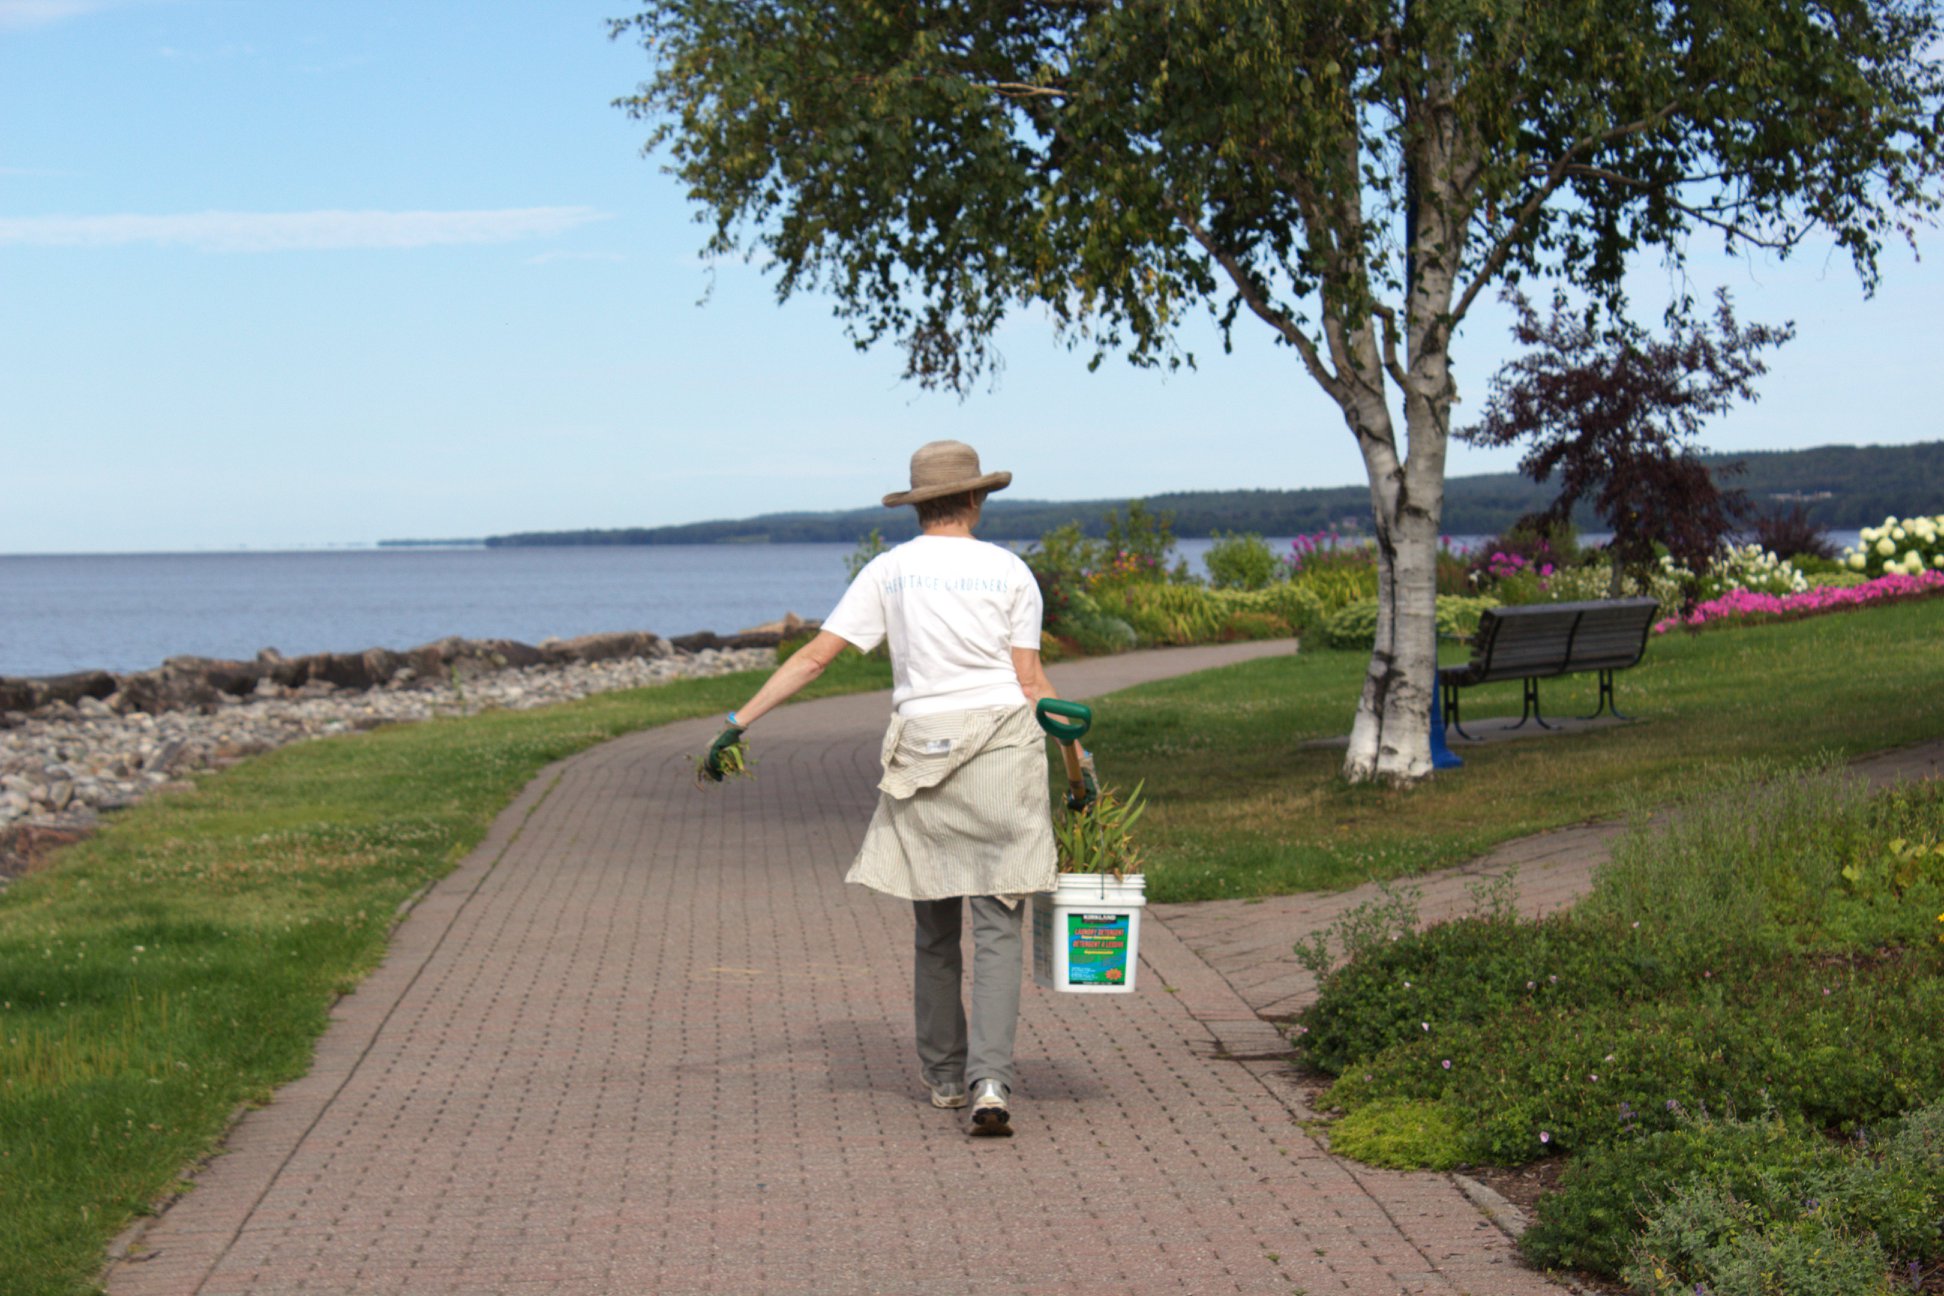 A person wearing gloves. a sunhat and carrying a bucket, walking down a brick walkway in a beautiful waterfront garden under a blue sky.